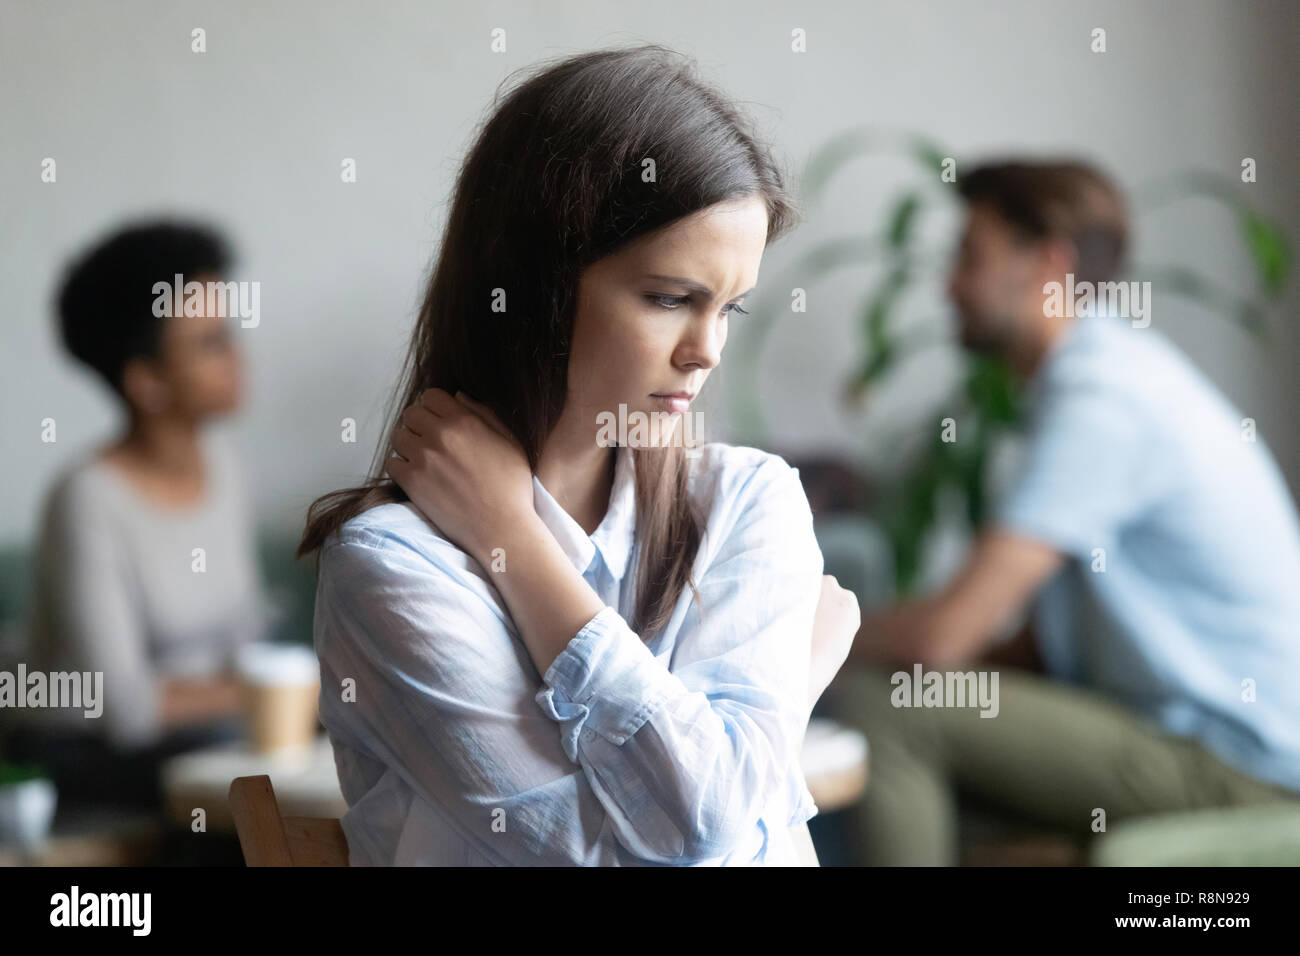 Upset young woman sitting alone in cafe offended at friends Stock Photo